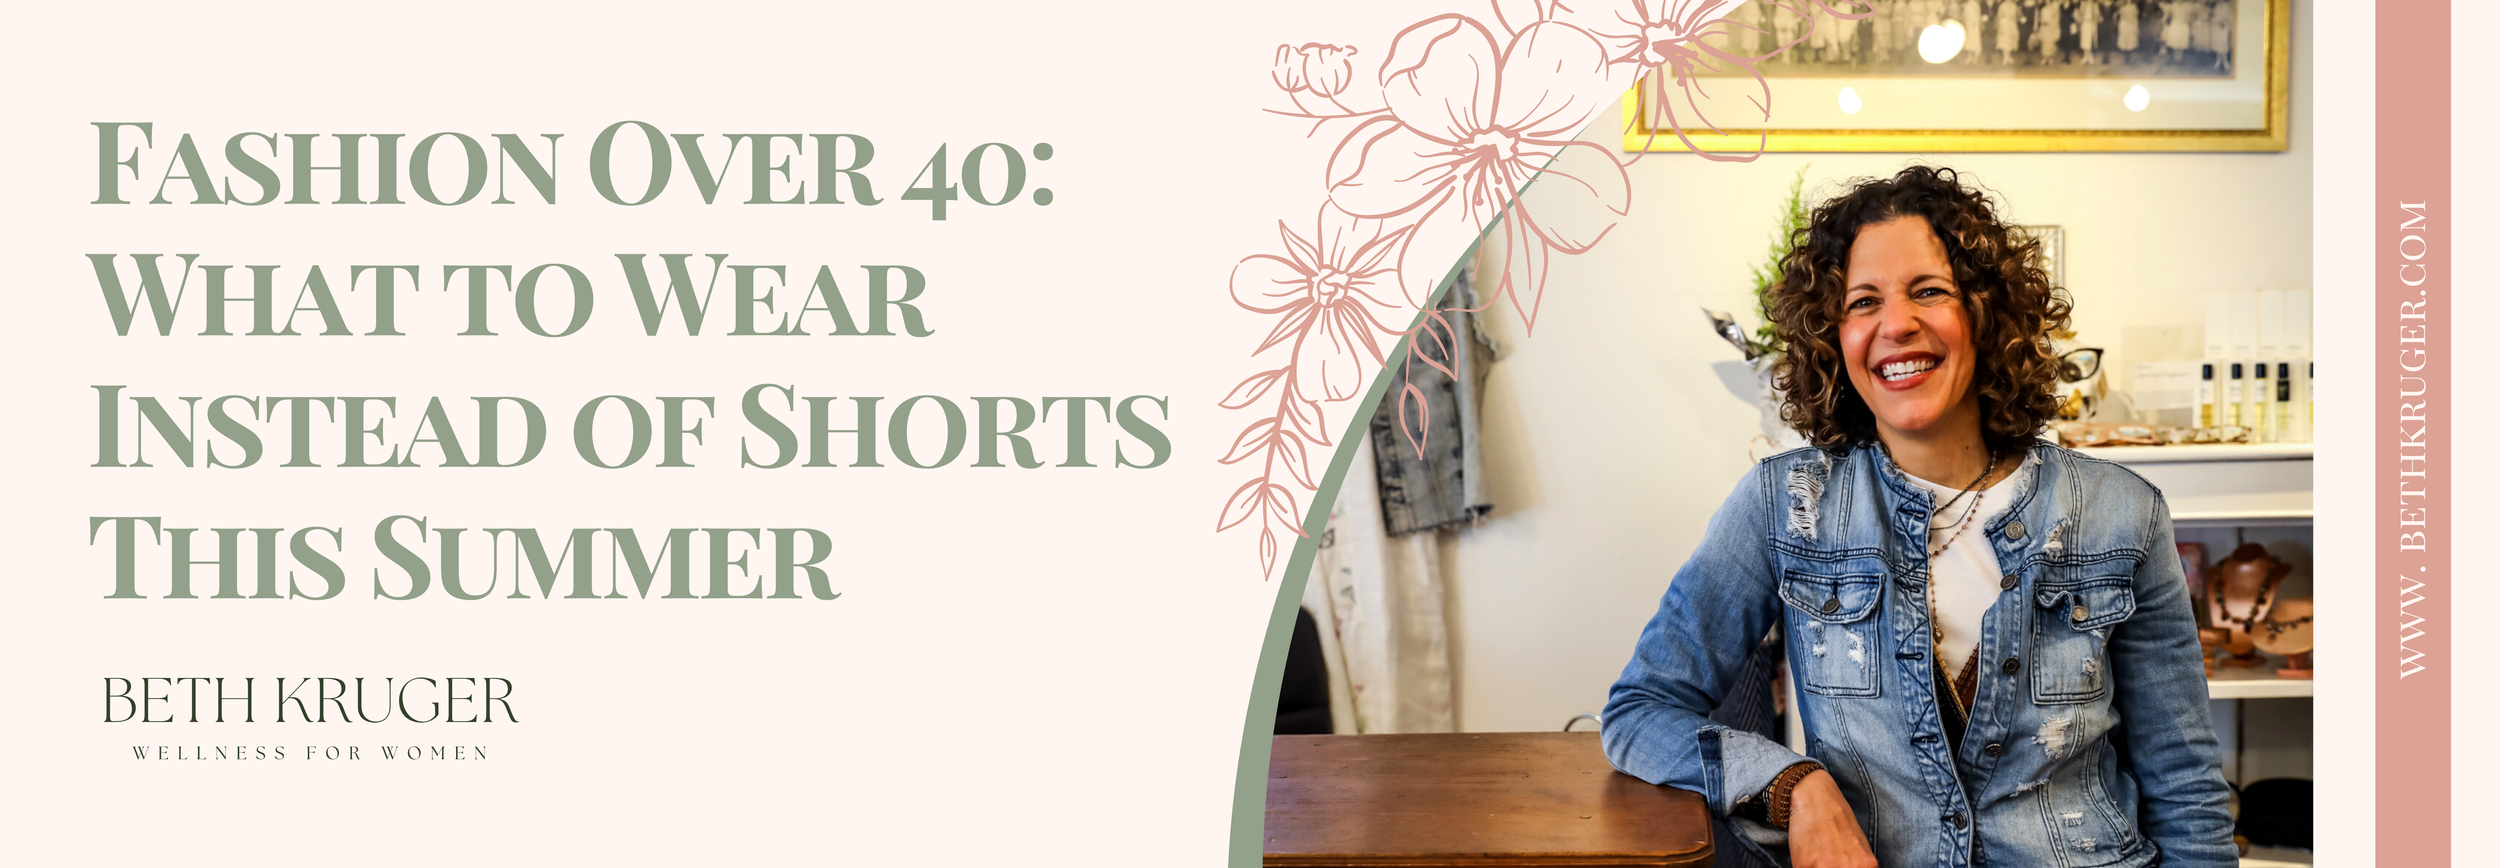 Fashion Over 40: What to Wear Instead of Shorts This Summer — Beth